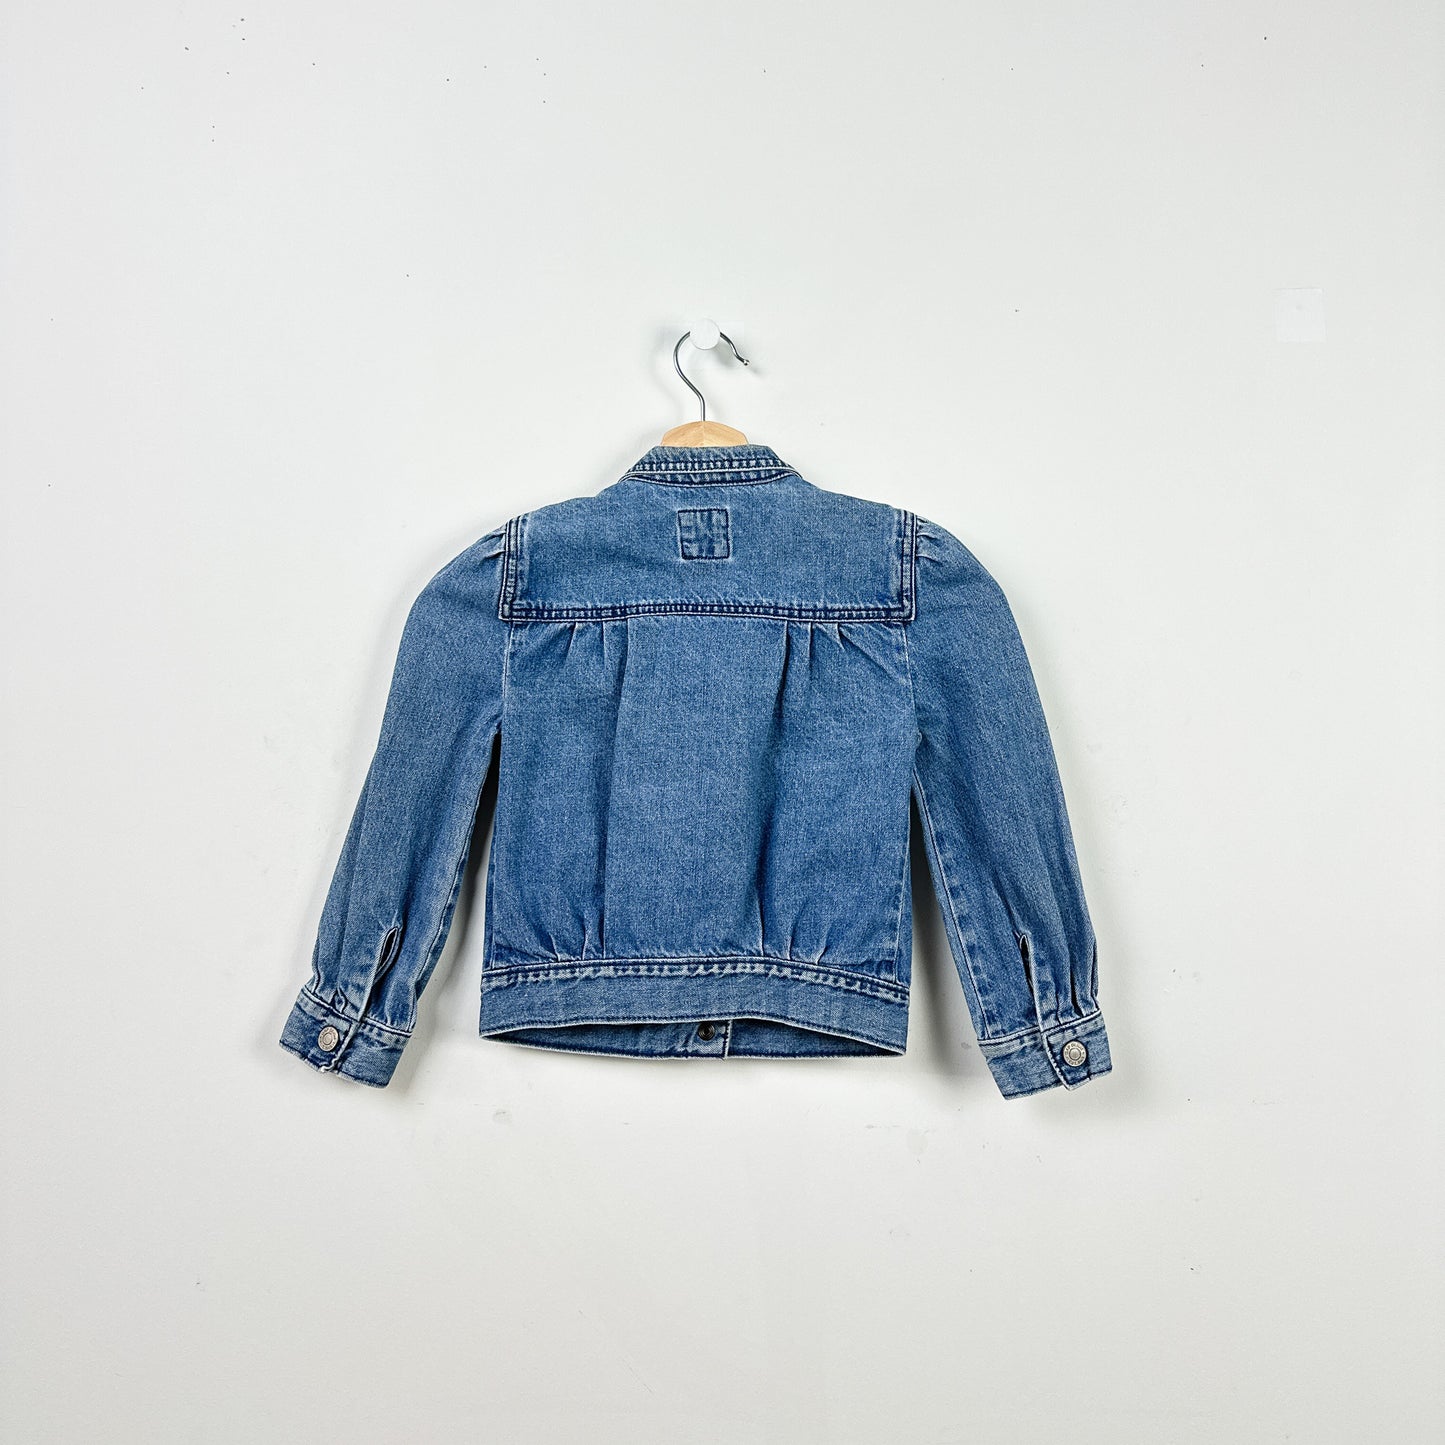 Gap Denim Bomber Jacket with Puff Sleeves - Size 6-7yr